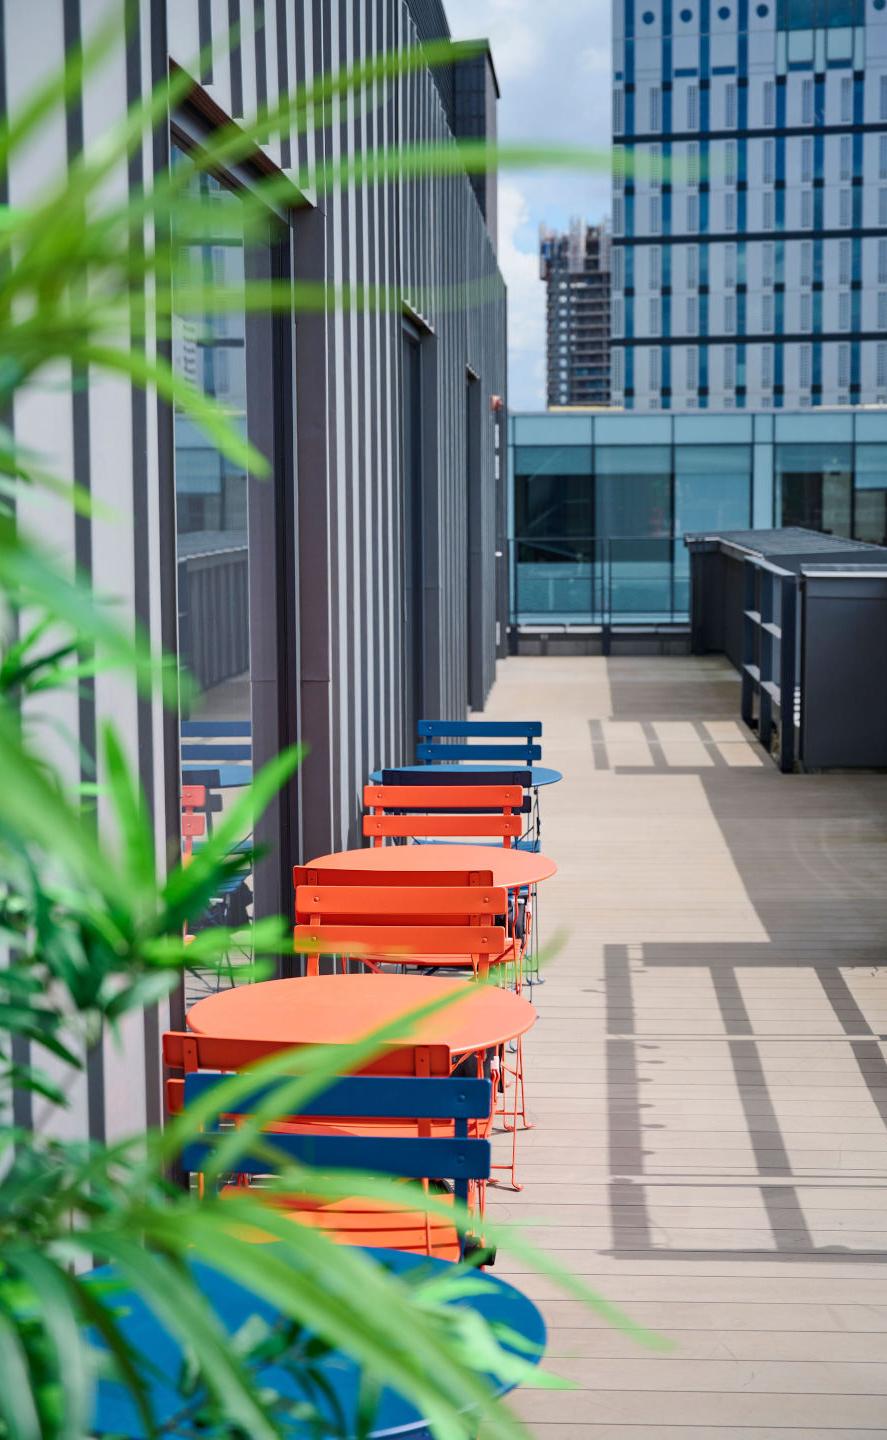 Photo of a rooftop area with tables and chairs.